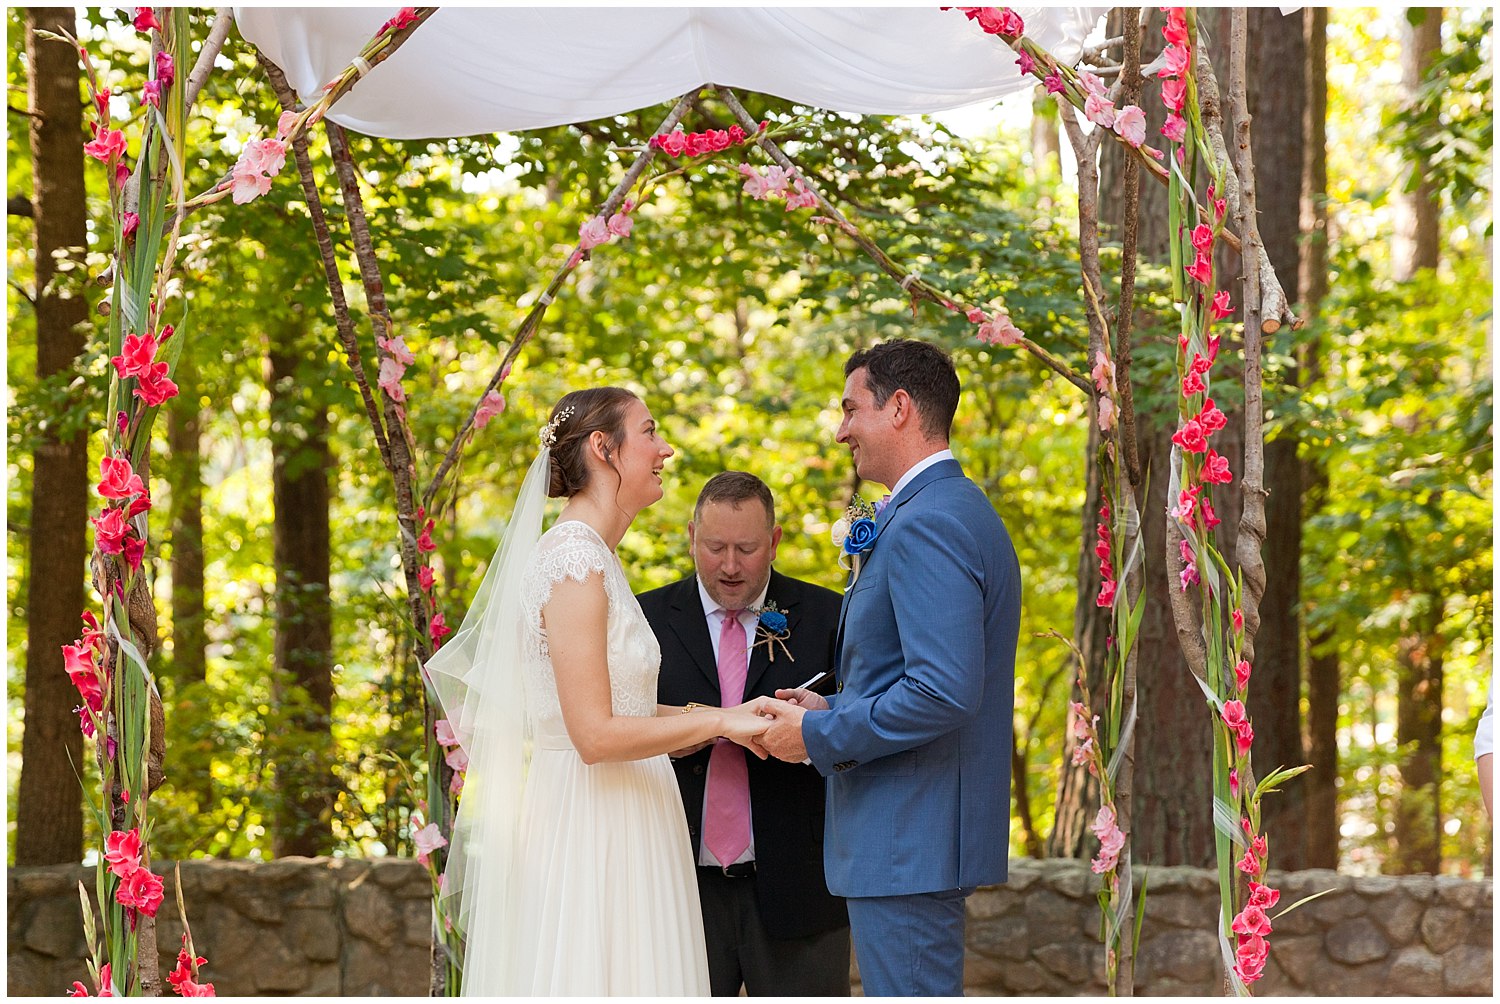 pretty outdoor wedding ceremony with floral chuppah